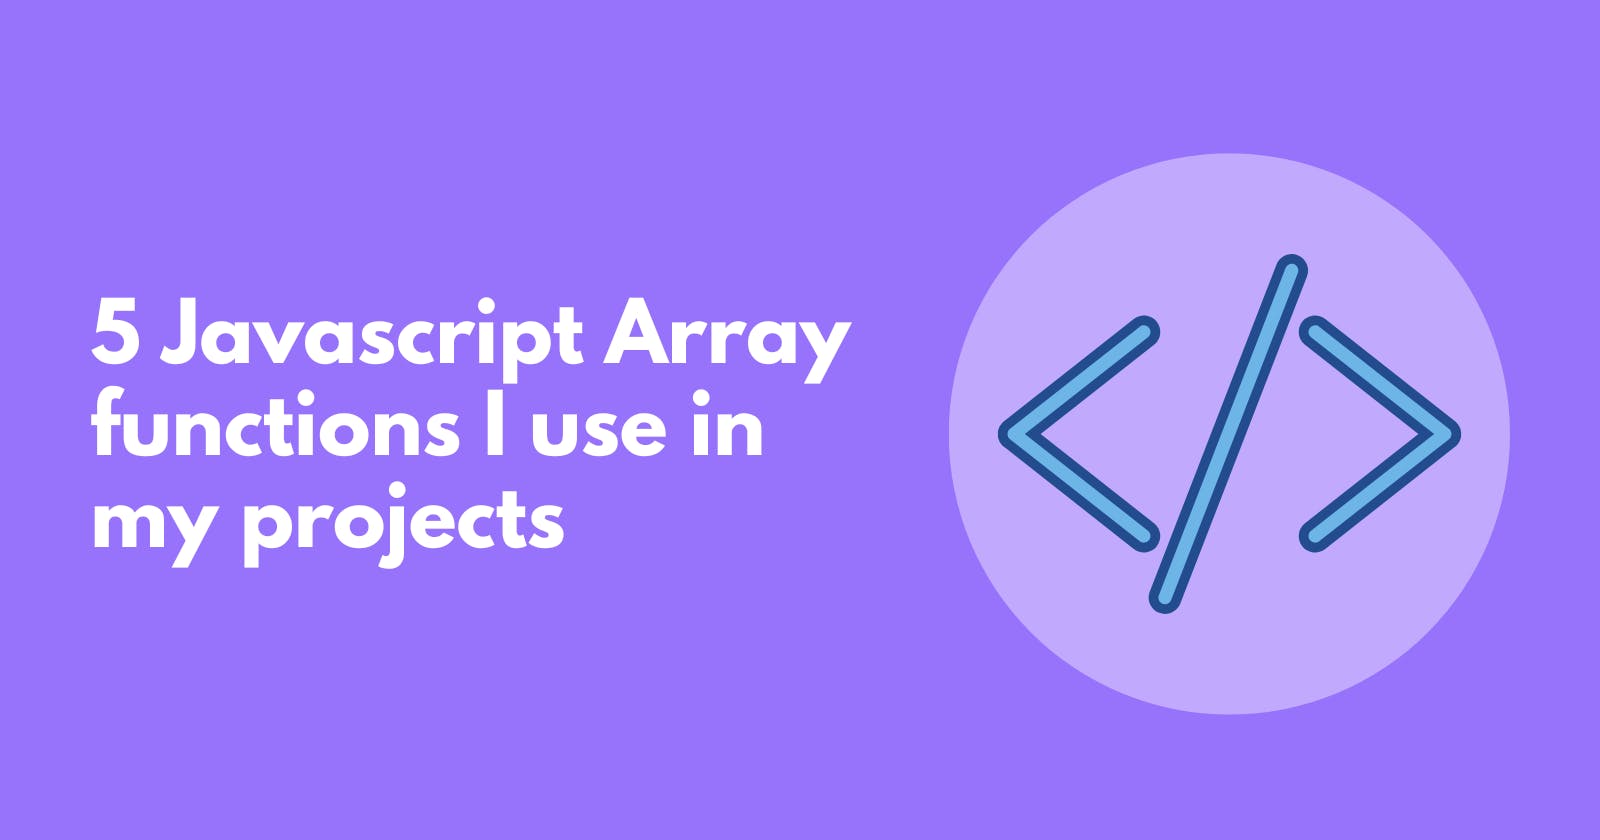 5 Javascript Array functions I use in my projects